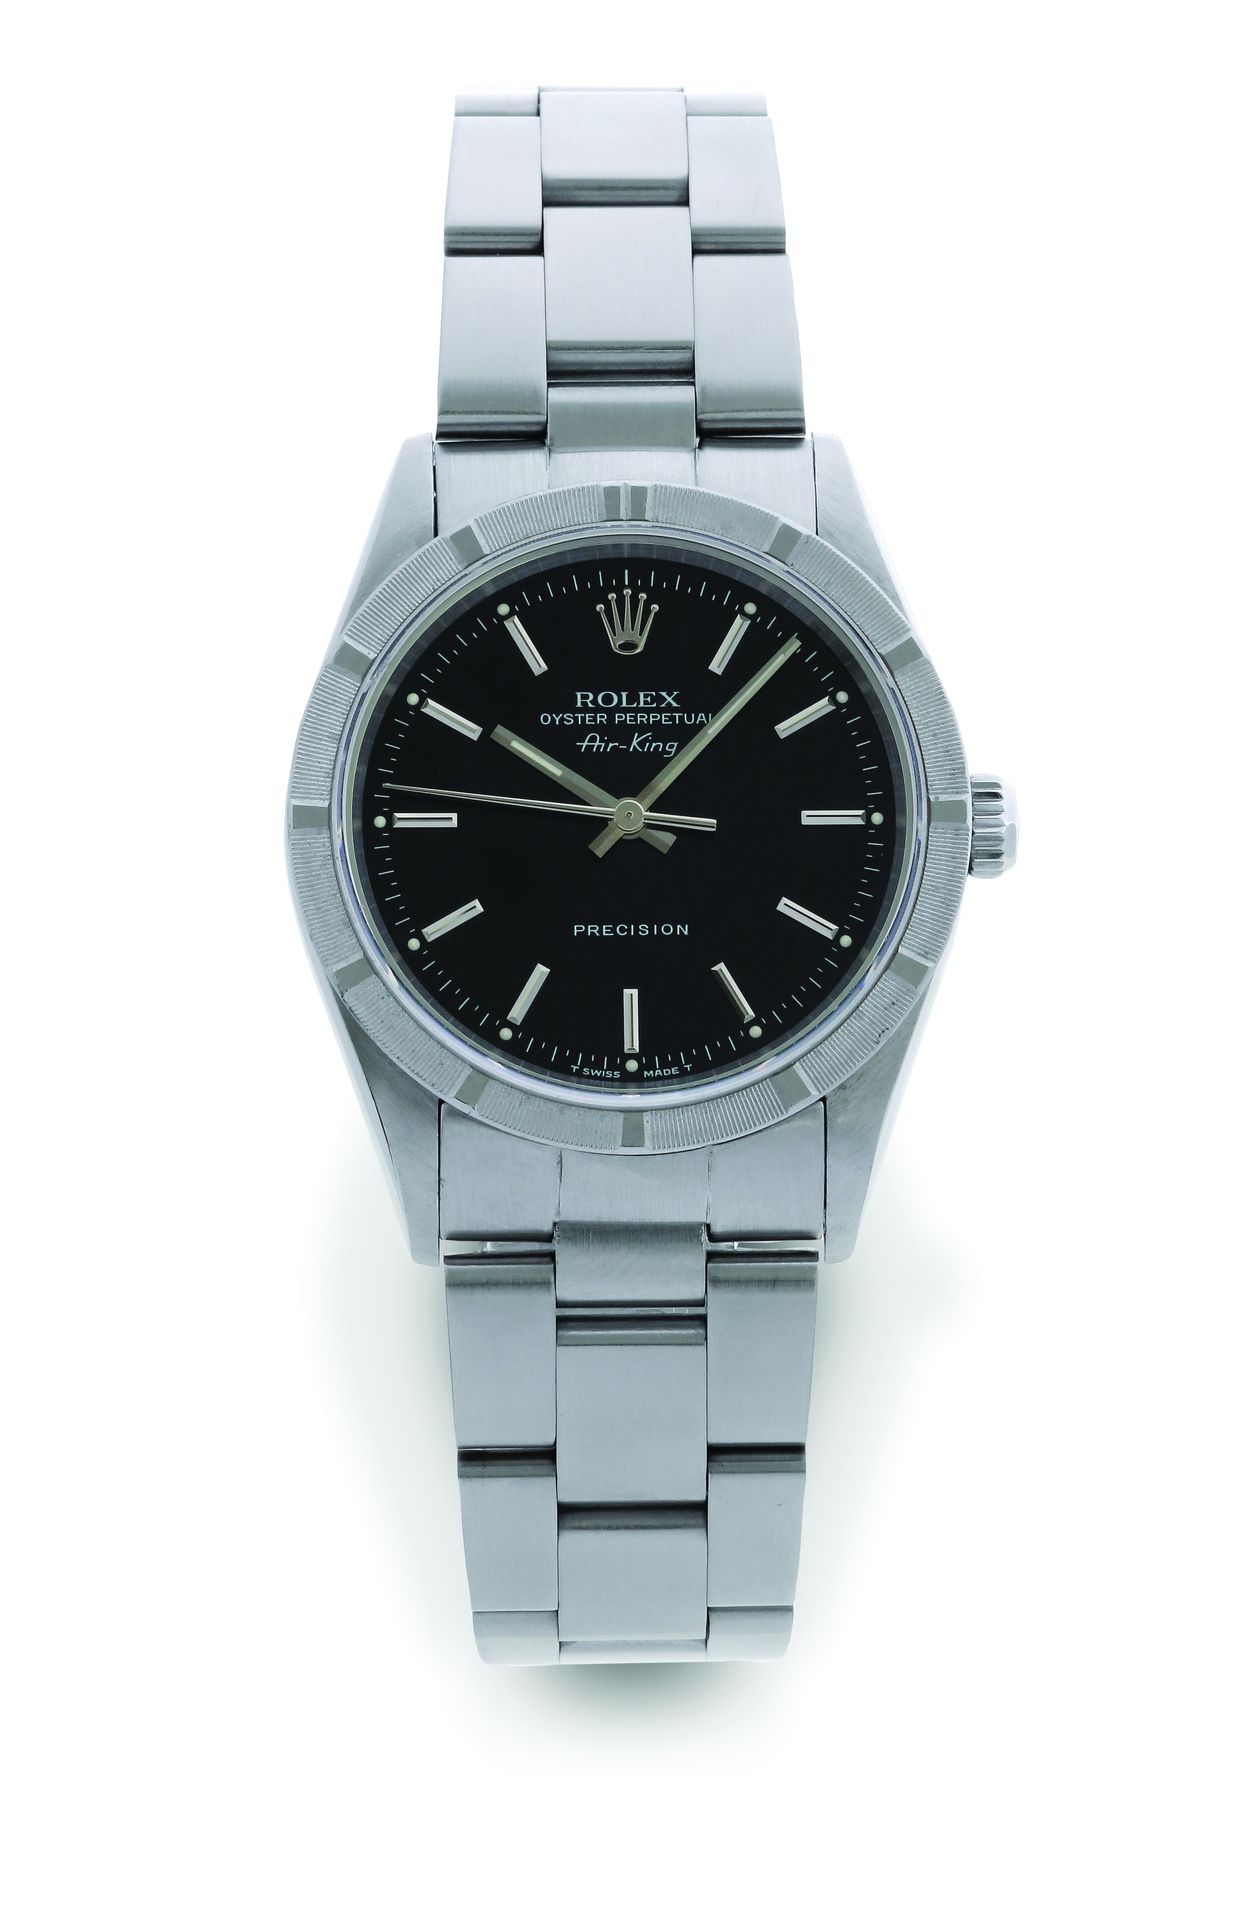 ROLEX Oyster Perpetual Air-King Précision
Reference 14010
Steel dress watch with&hellip;